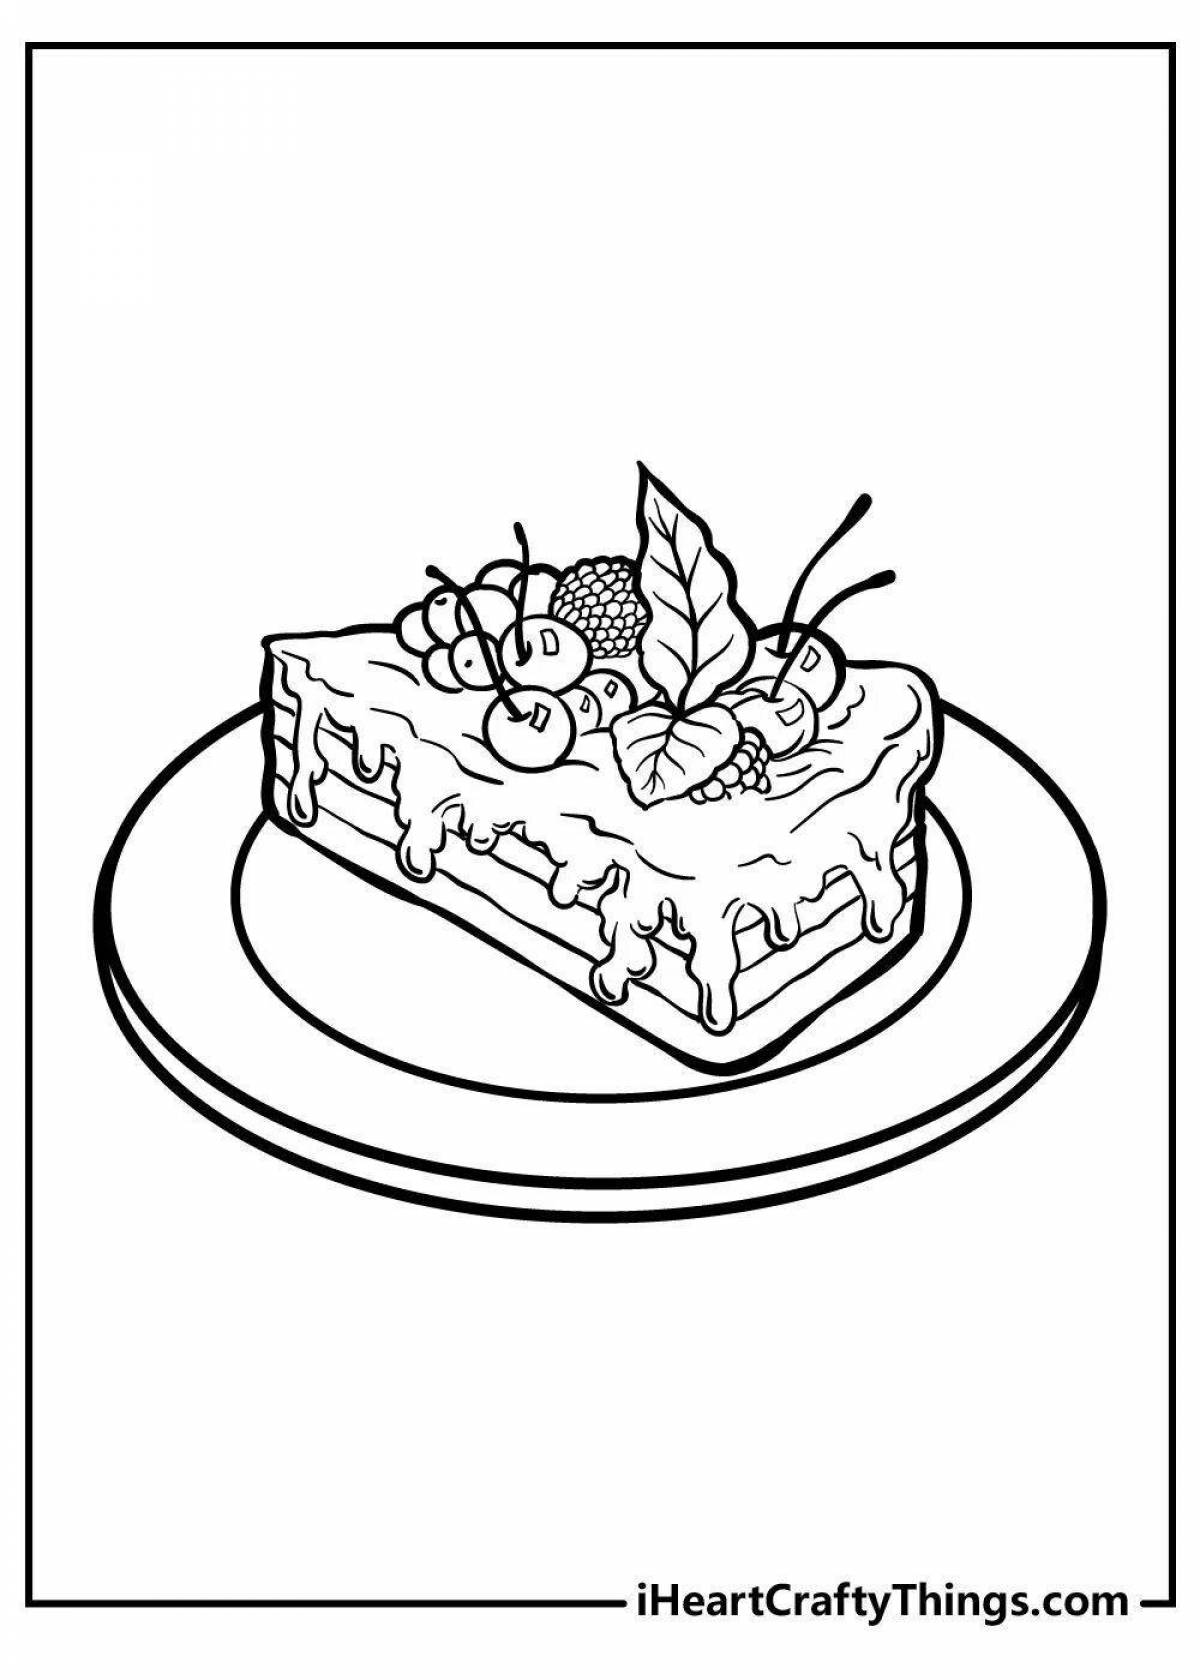 Crazy Cake Coloring Page for 6-7 year olds